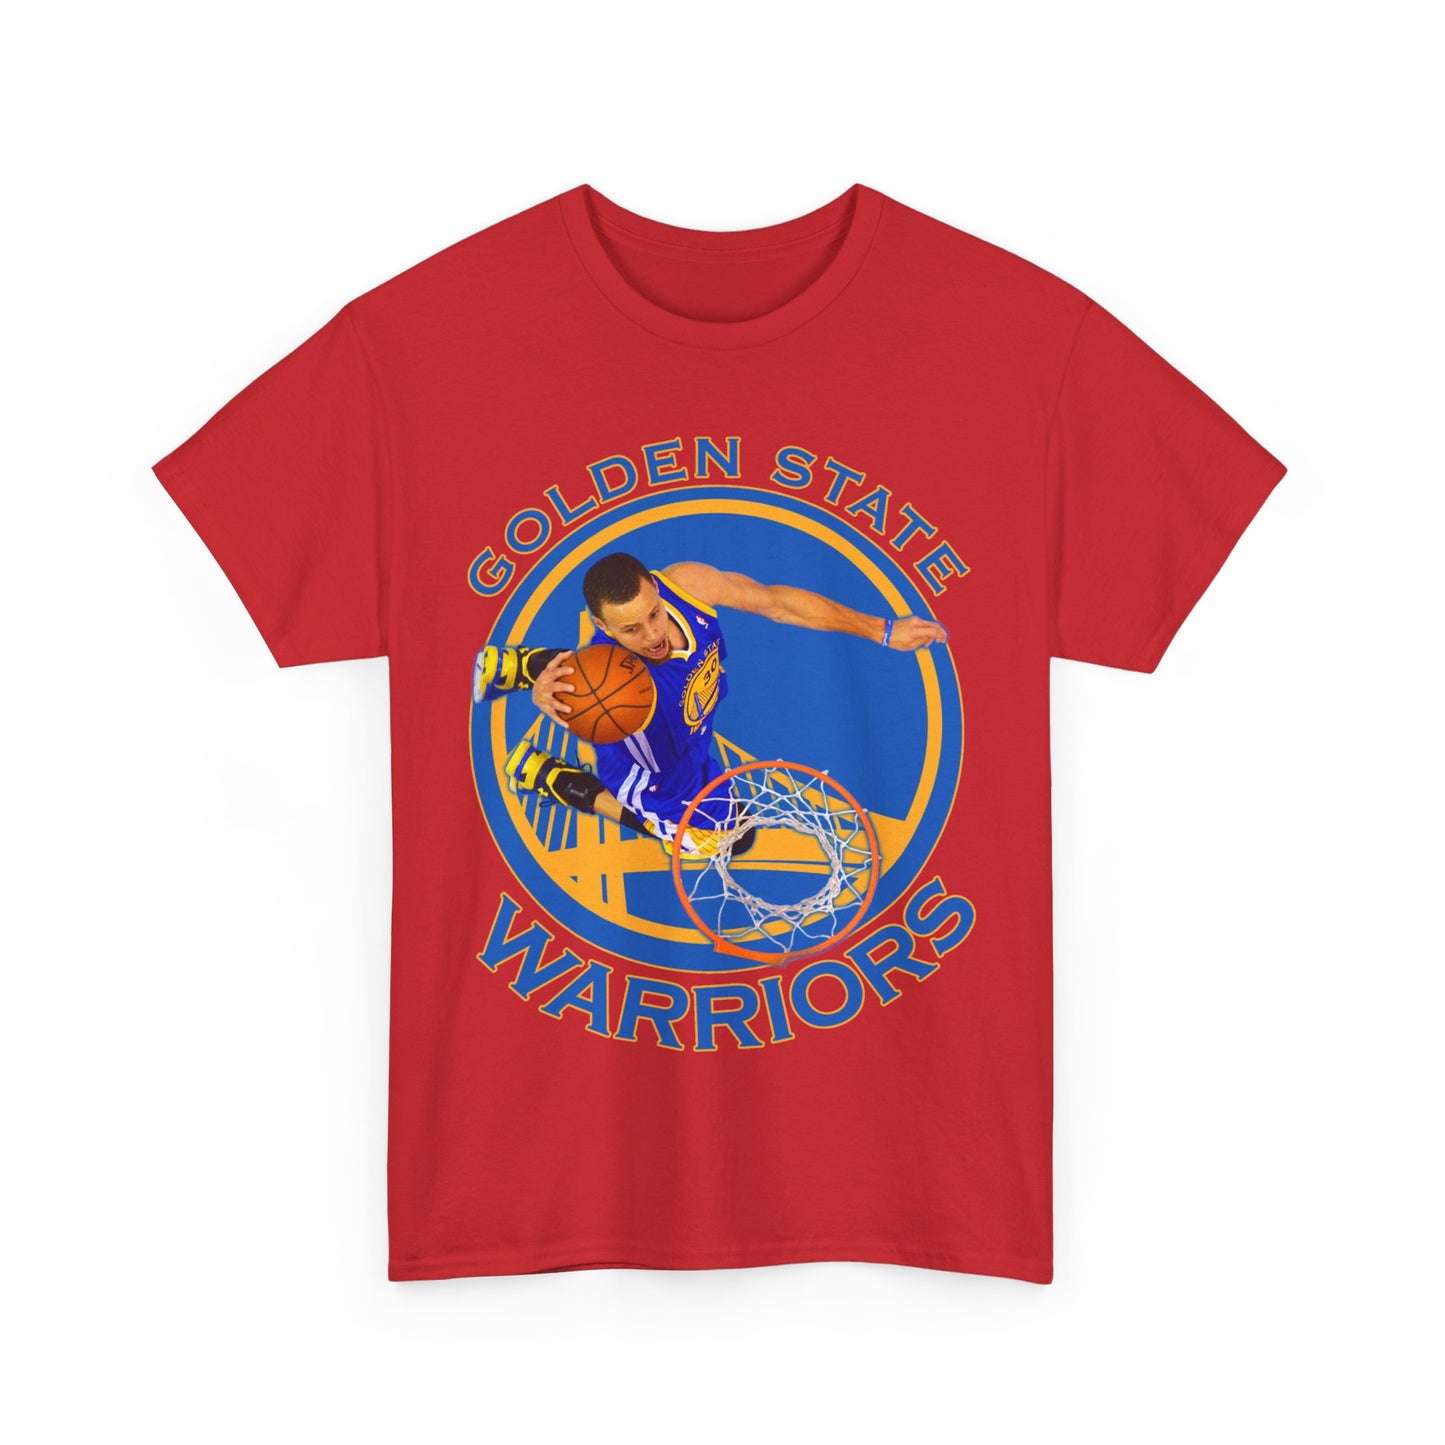 Golden State Warriors High Quality Printed Unisex Heavy Cotton T-Shirt